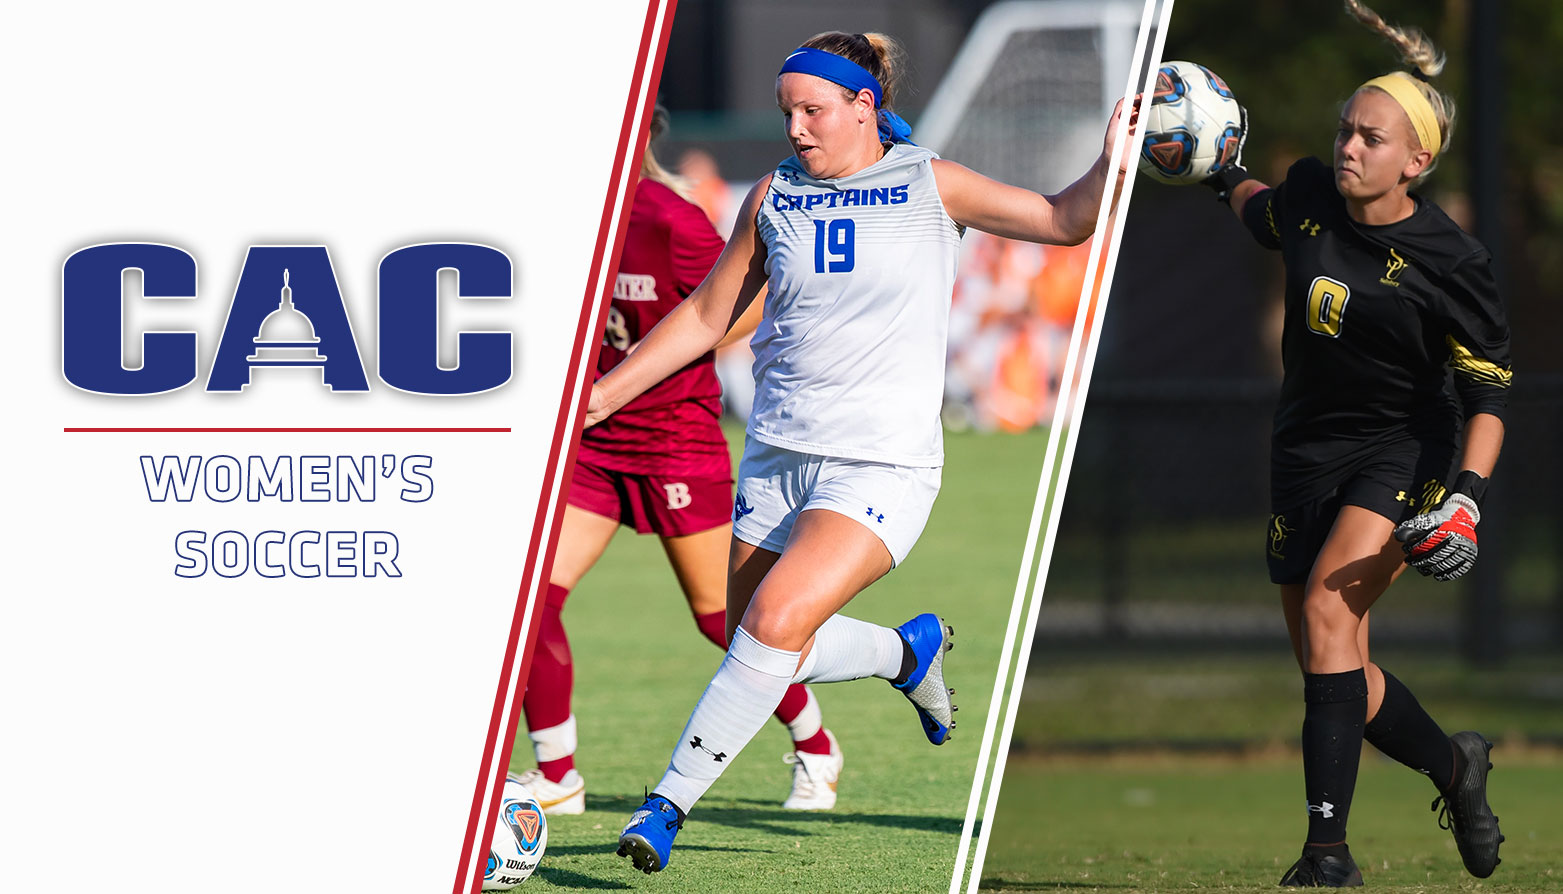 CNU's Cook & Salisbury's Hill Collect CAC Weekly Honors for Fourth Time Each This Season